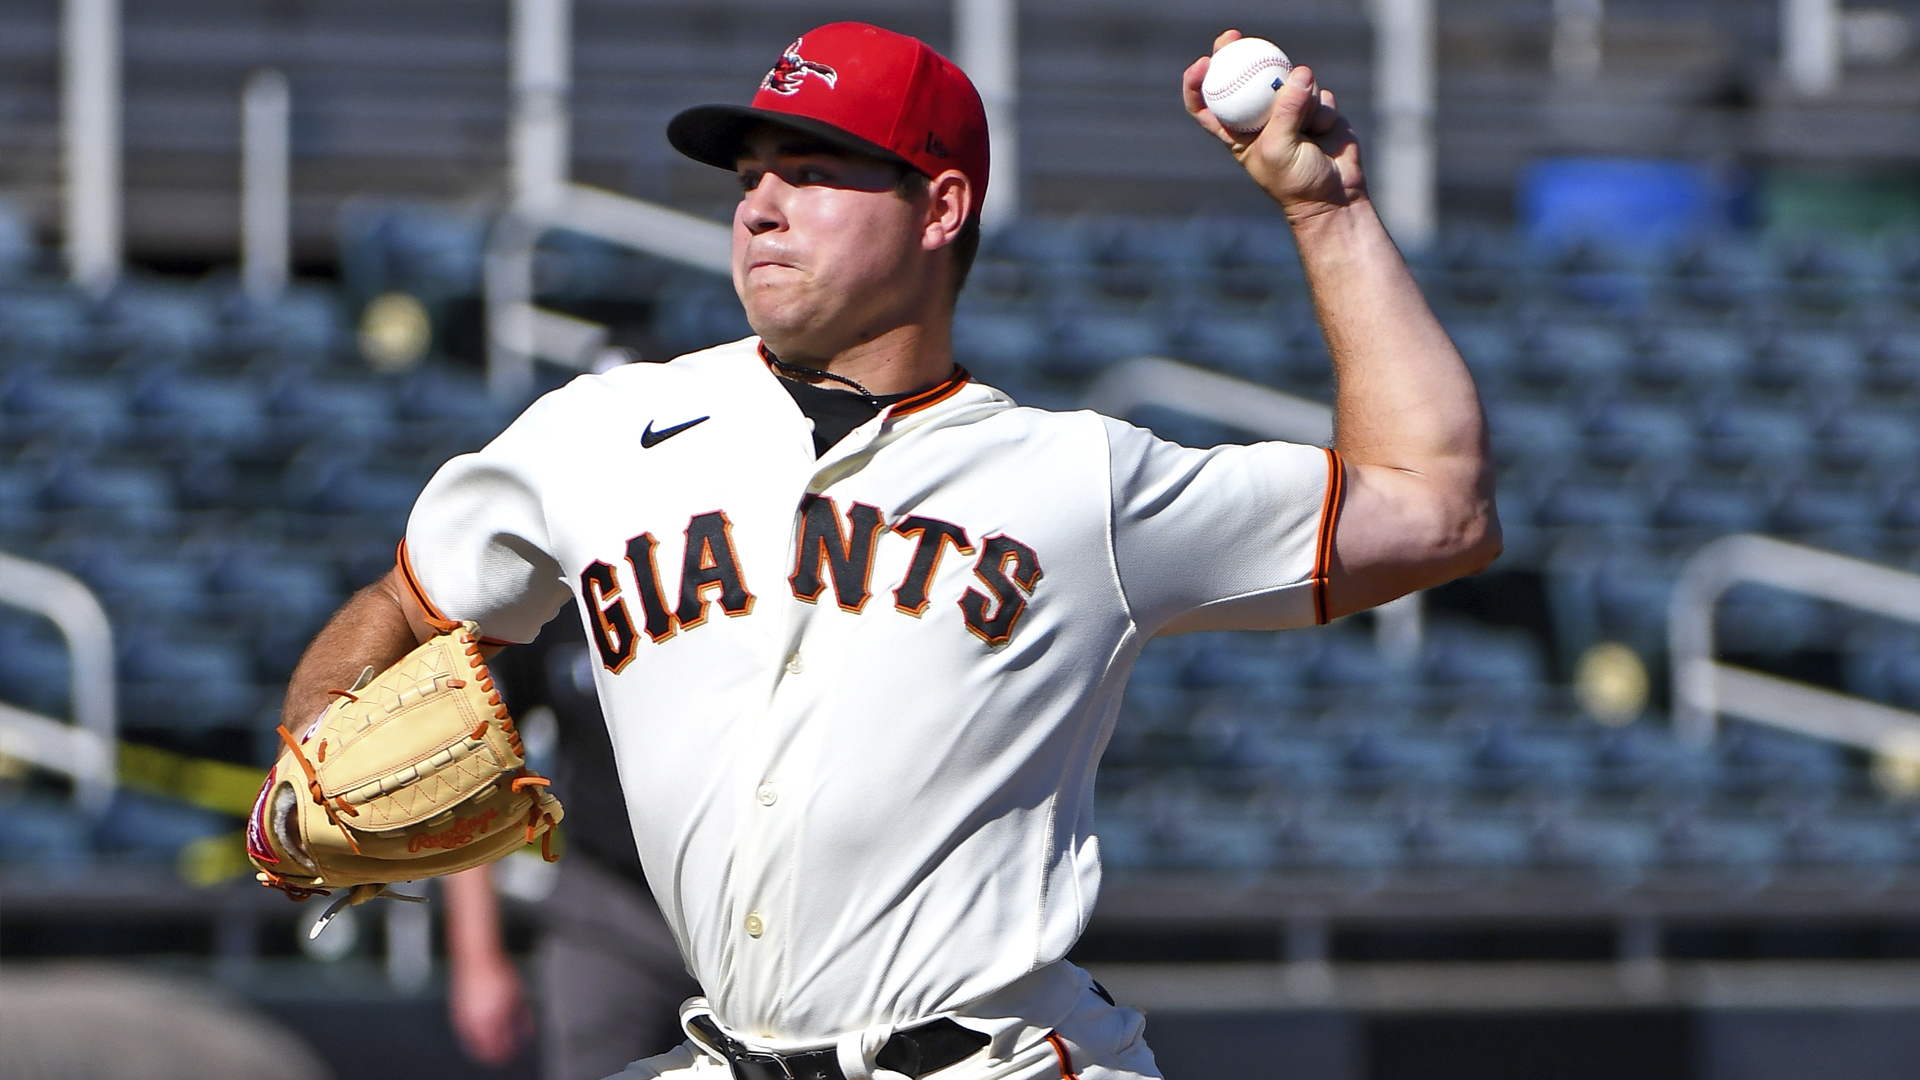 Giants commit to paying Minor Leaguers through June